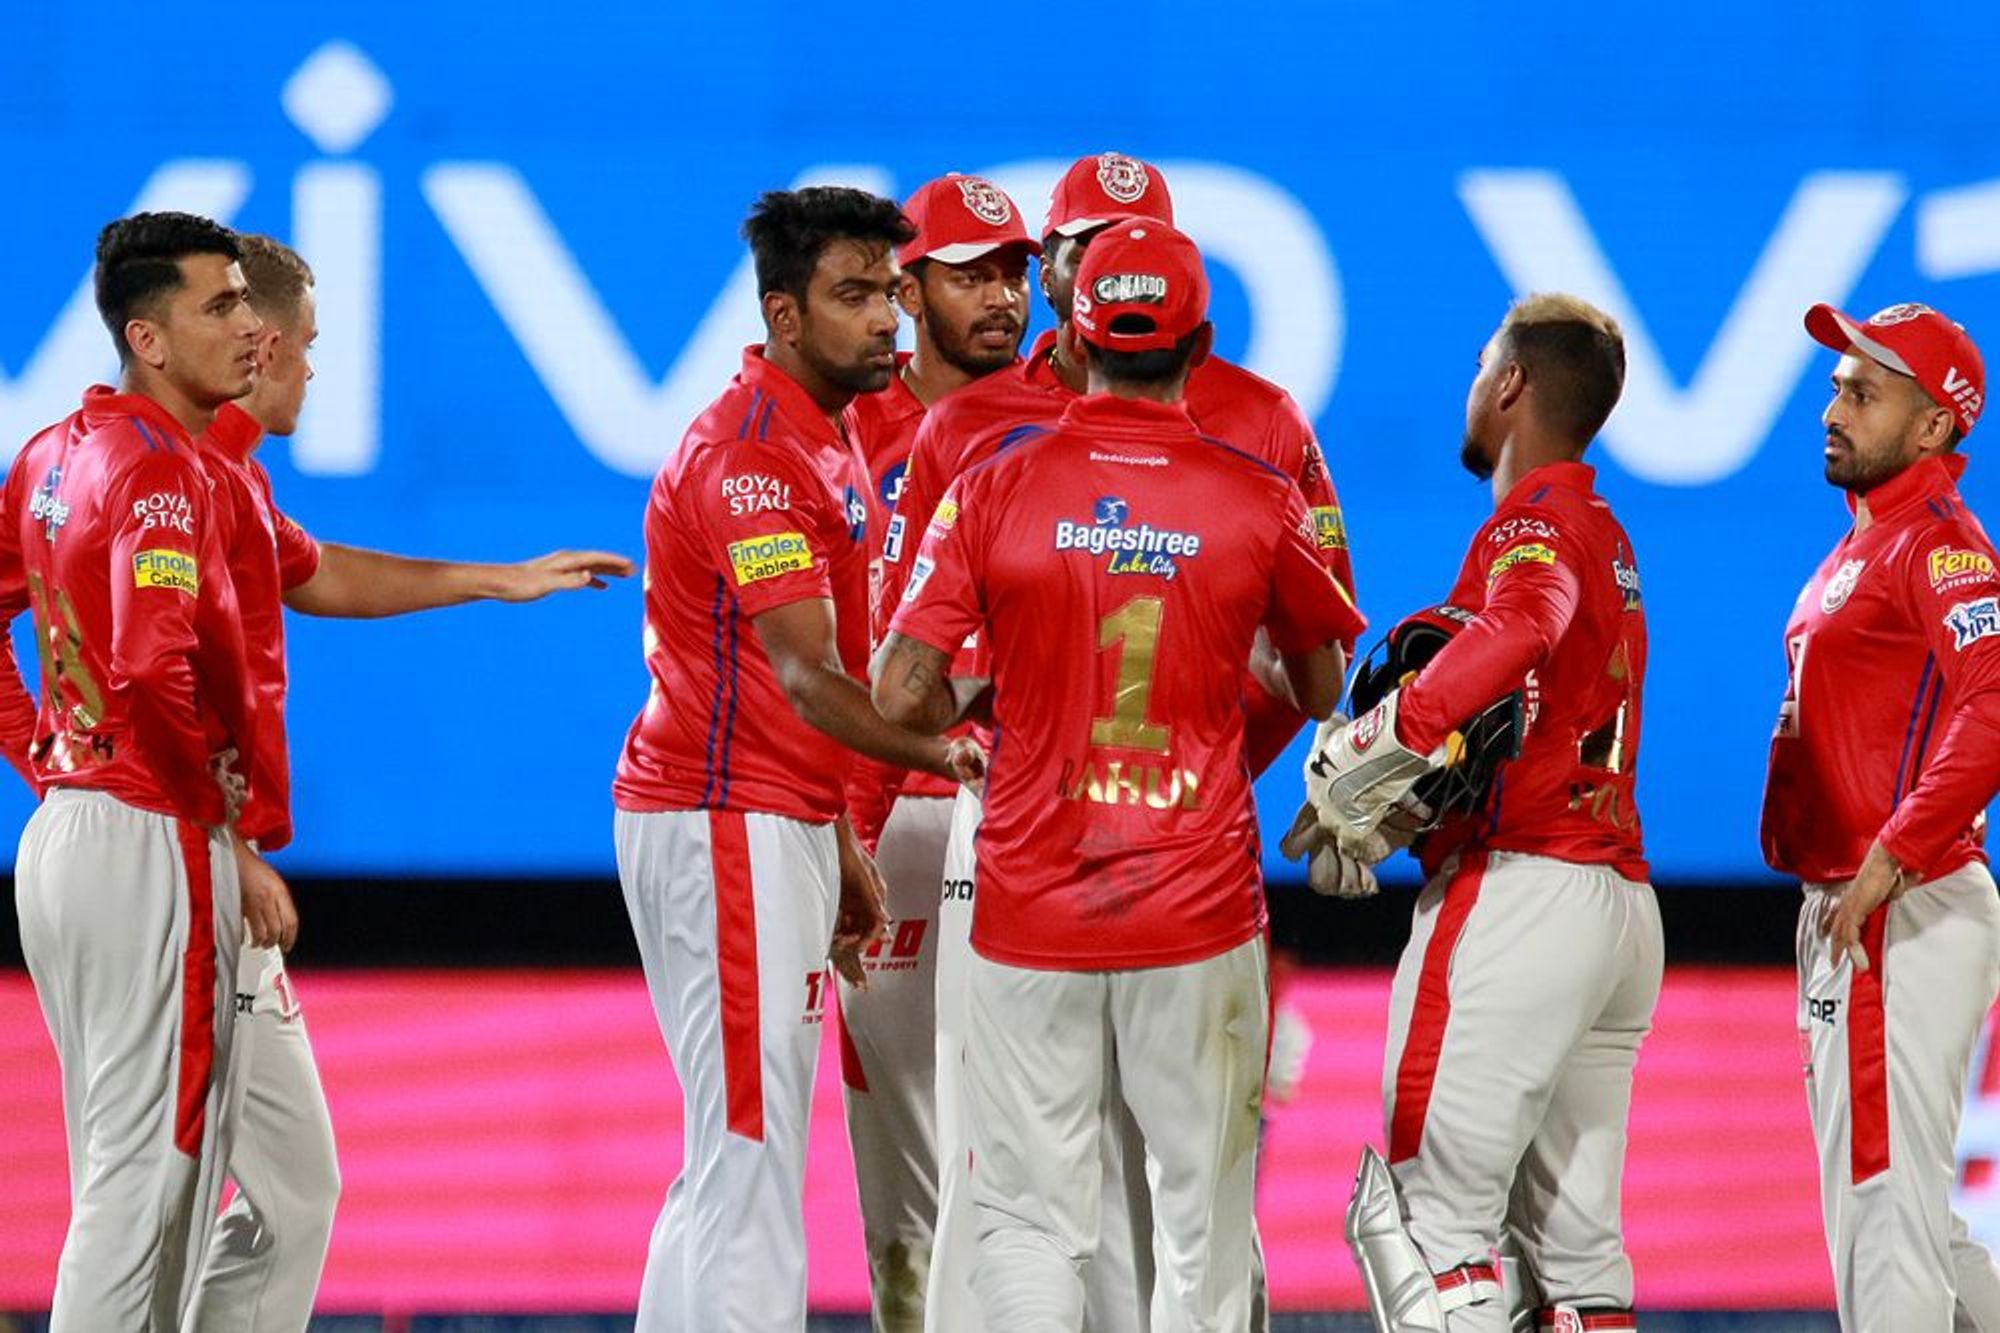 Ankit Rajpoot refused to mankad in 2019 IPL due to fear of being ostracized, reveals R Ashwin